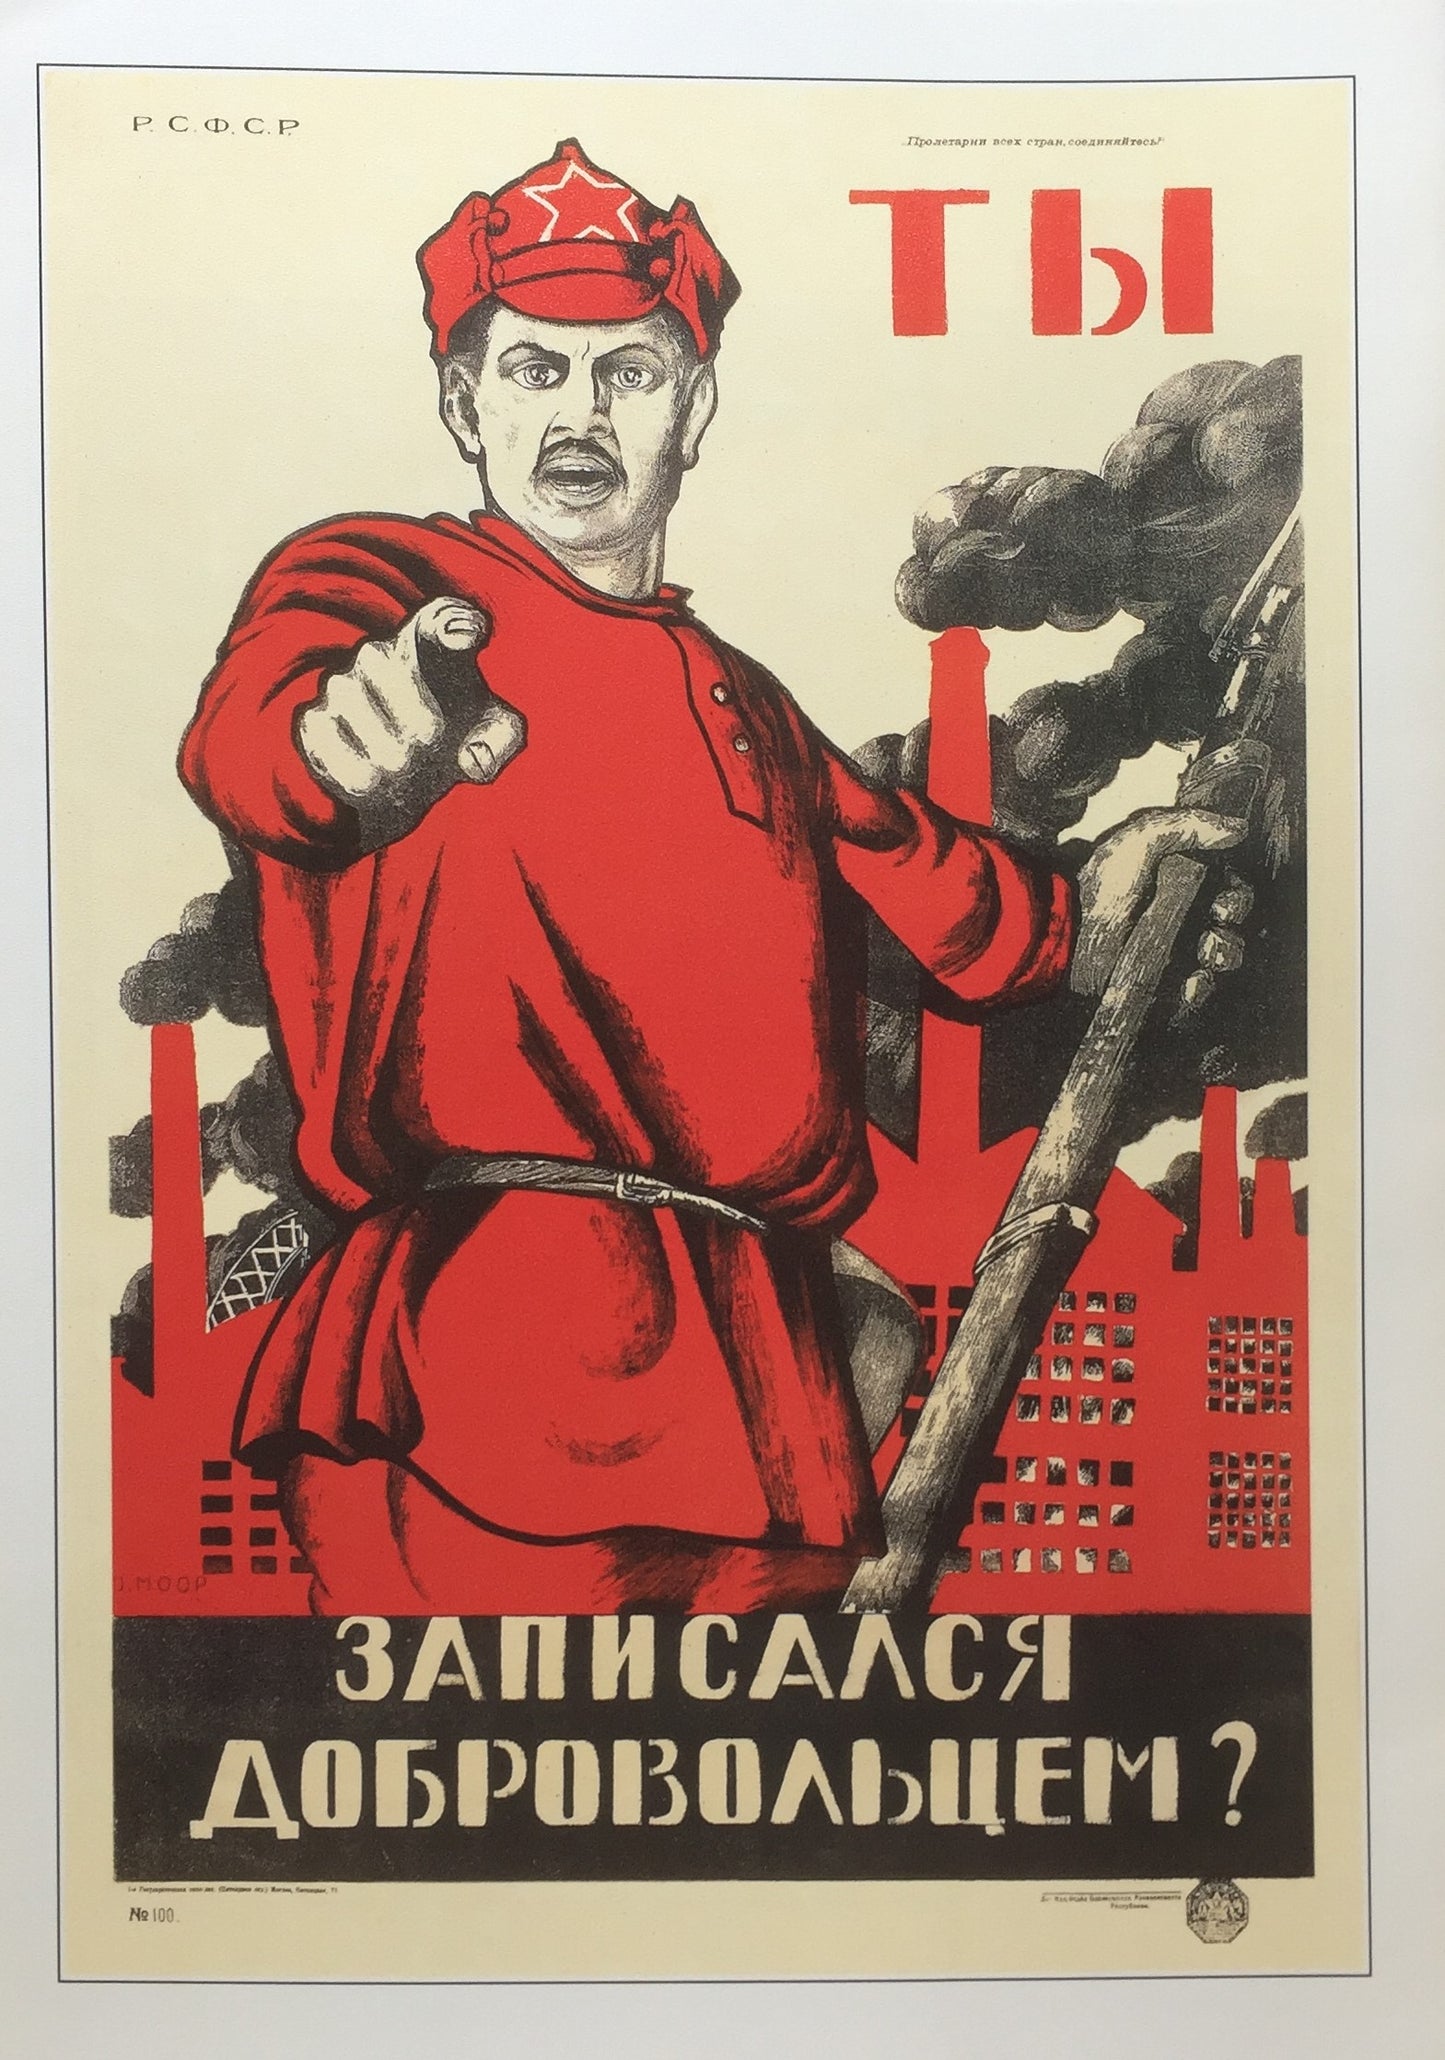 The Soviet Political Poster　ソビエトの政治ポスター　18枚セット